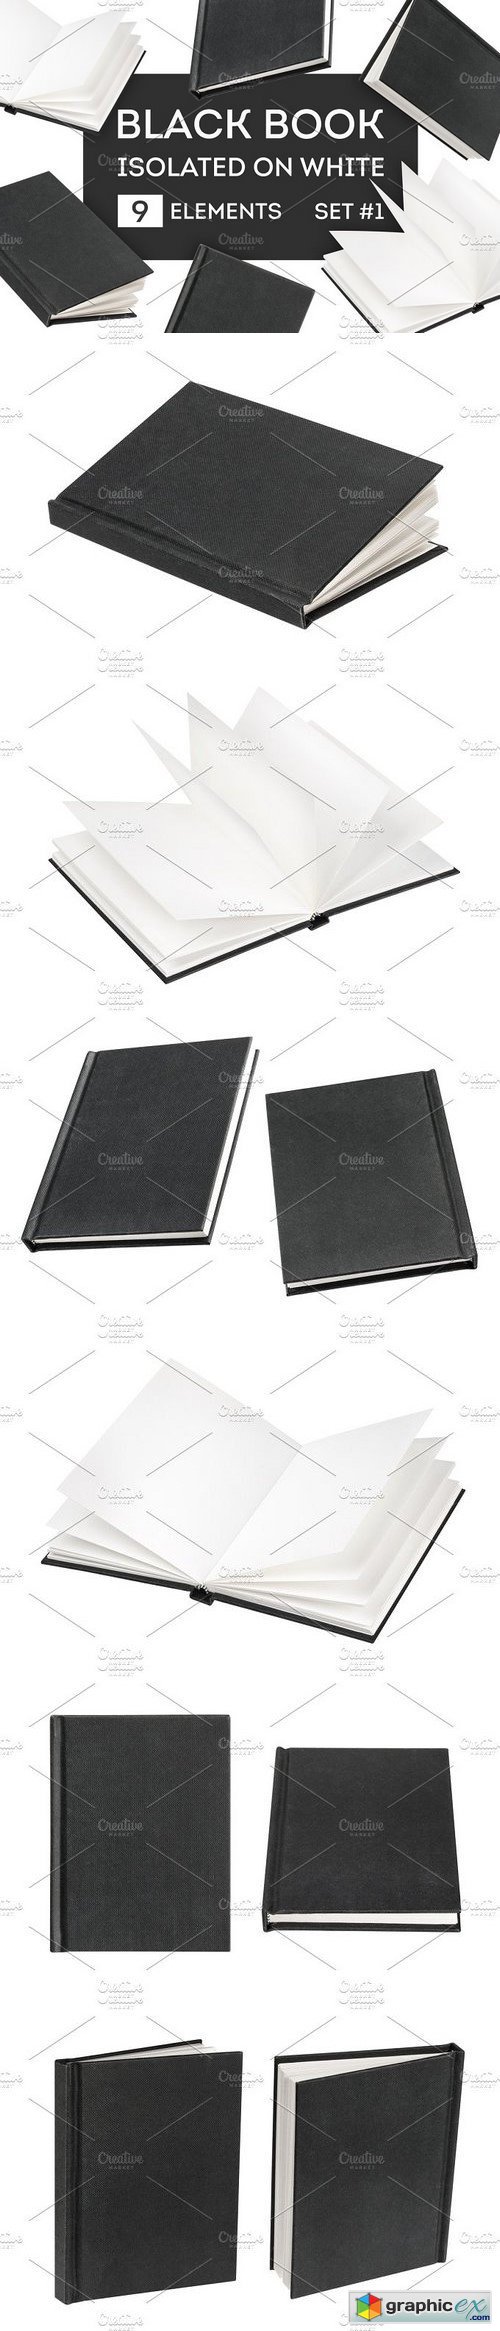 Black book mock-up isolated on white